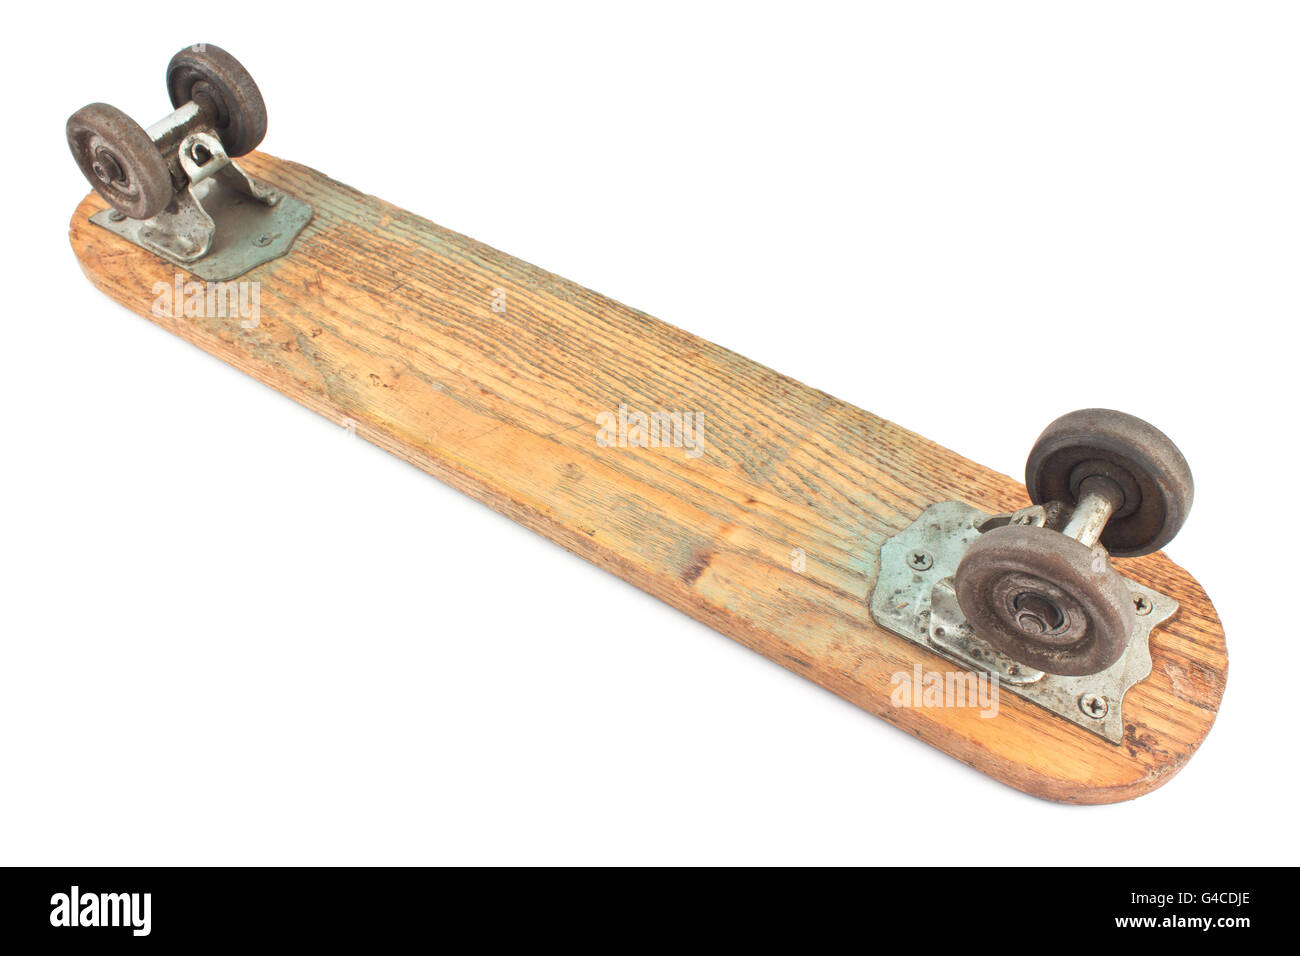 Old wooden skateboard isolated on white Stock Photo